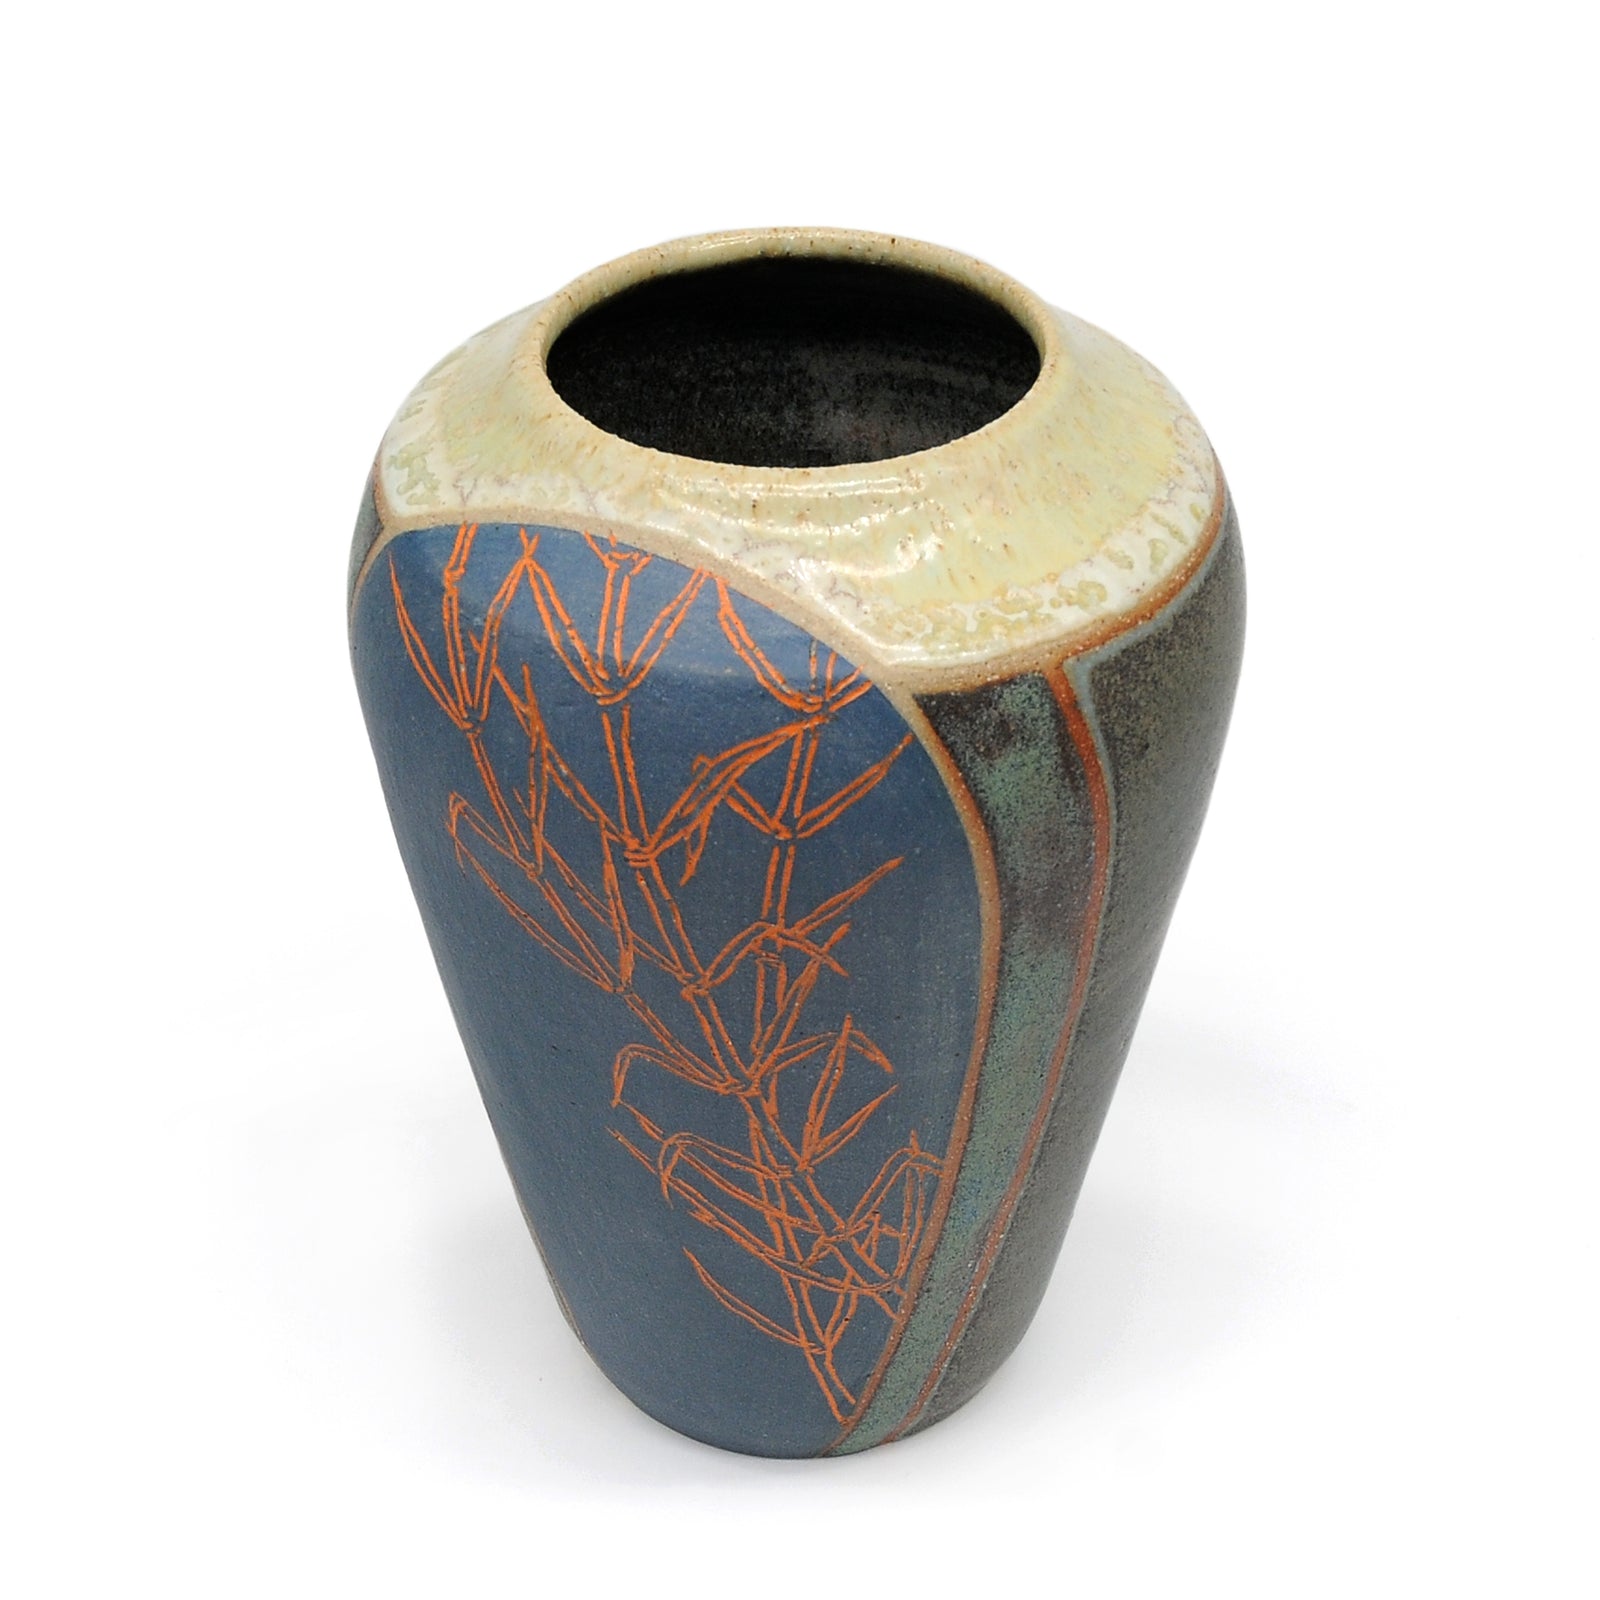 MK23 Vase by Miae Kim available at Padstow Gallery, Cornwall